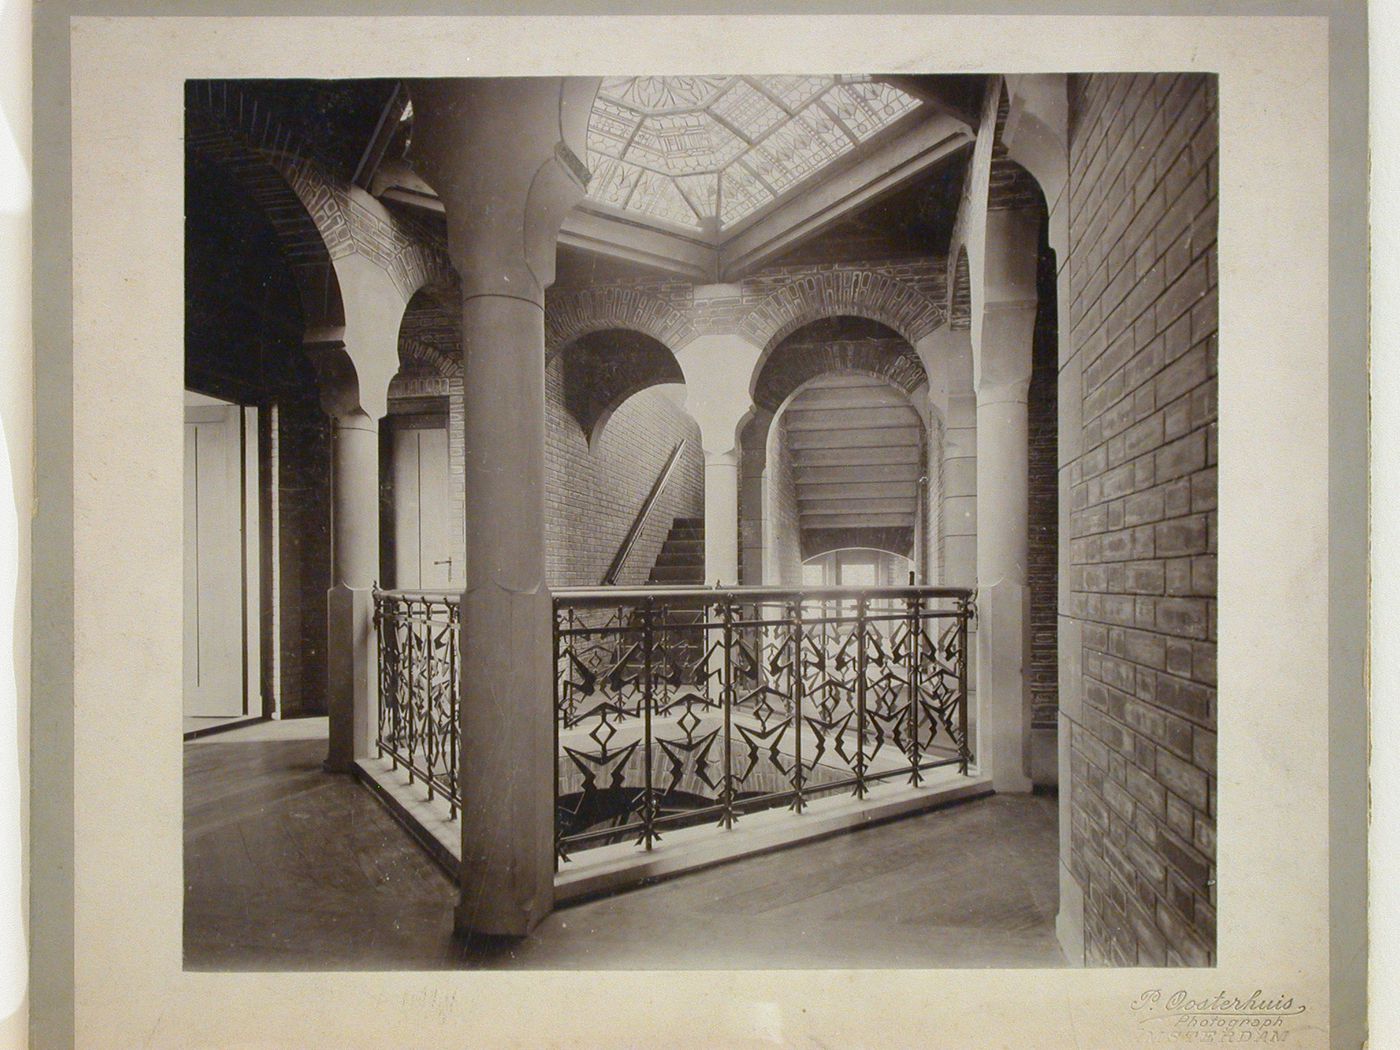 Interior view of Huis [House] Carel Henny showing the iron railing around the light well on the first floor landing with the skylight above, Oude Scheveningseweg 42, The Hague, Netherlands